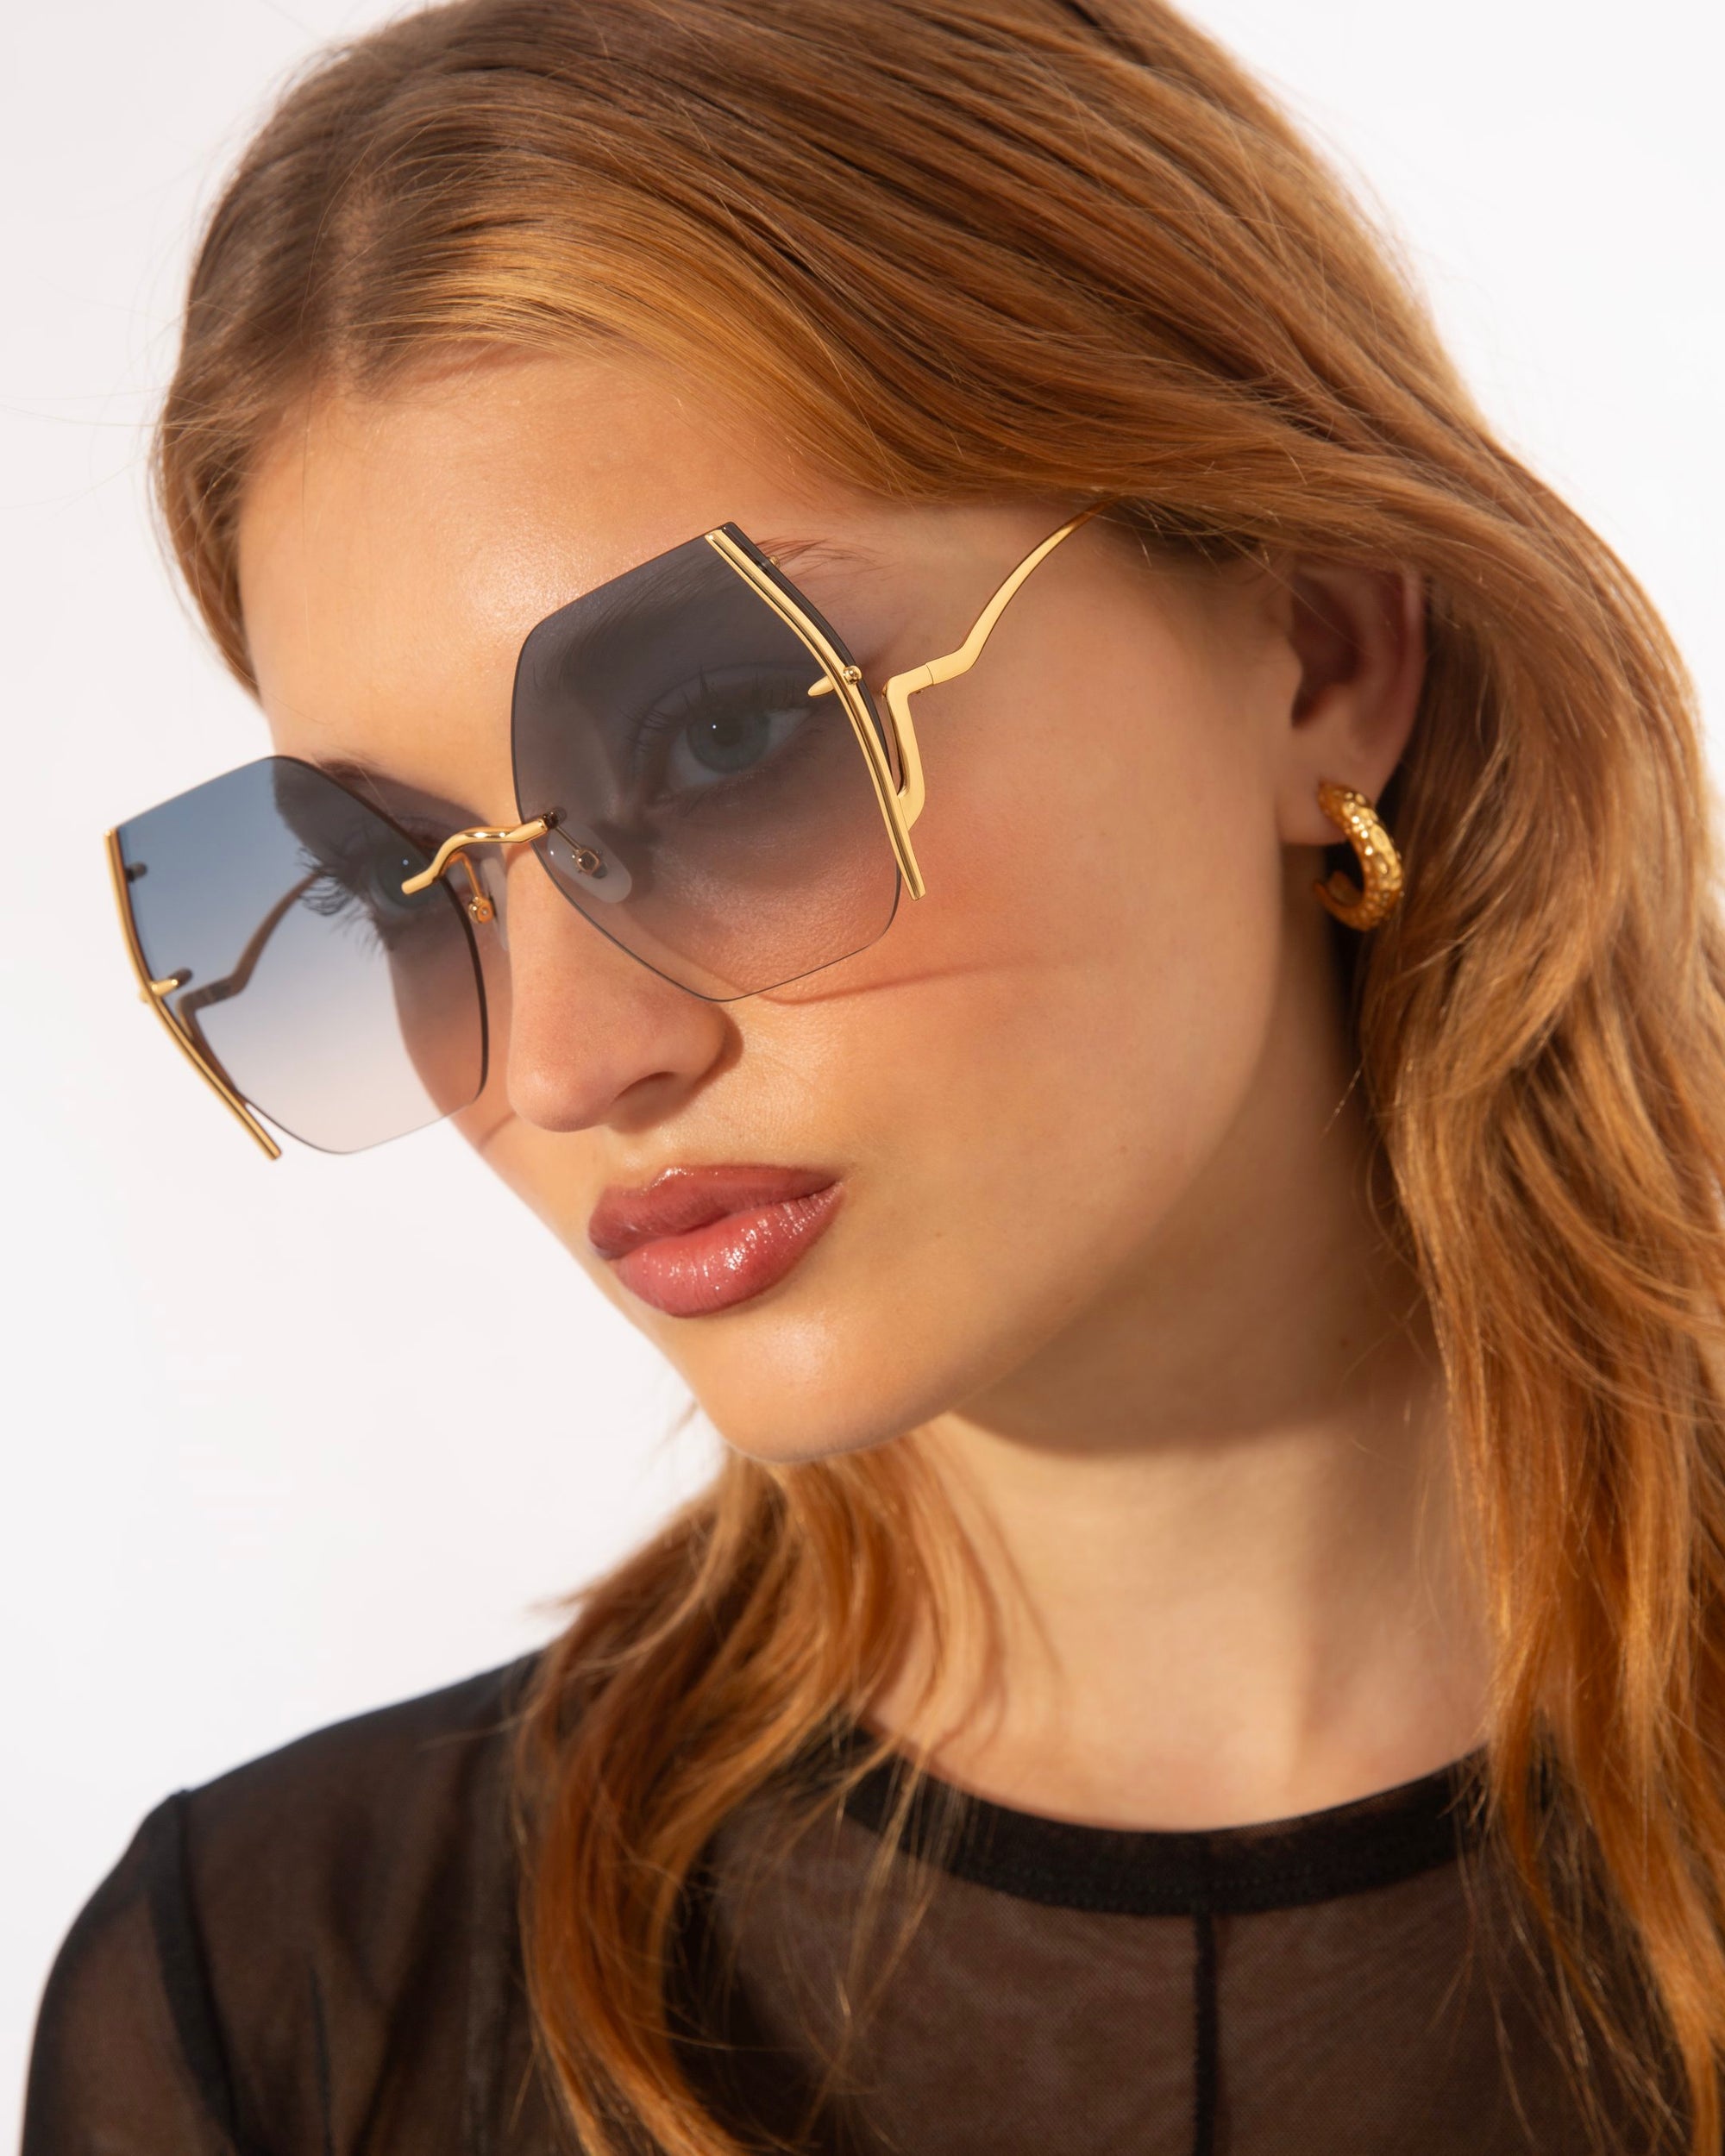 A woman with long, light brown hair wears oversized, square-shaped For Art&#39;s Sake® Generation sunglasses with a gold frame and jadestone nosepads for extra comfort. She has gold hoop earrings and is dressed in a black top. The For Art&#39;s Sake® Generation sunglasses offer UV protection, ensuring style and safety. The background is plain white.